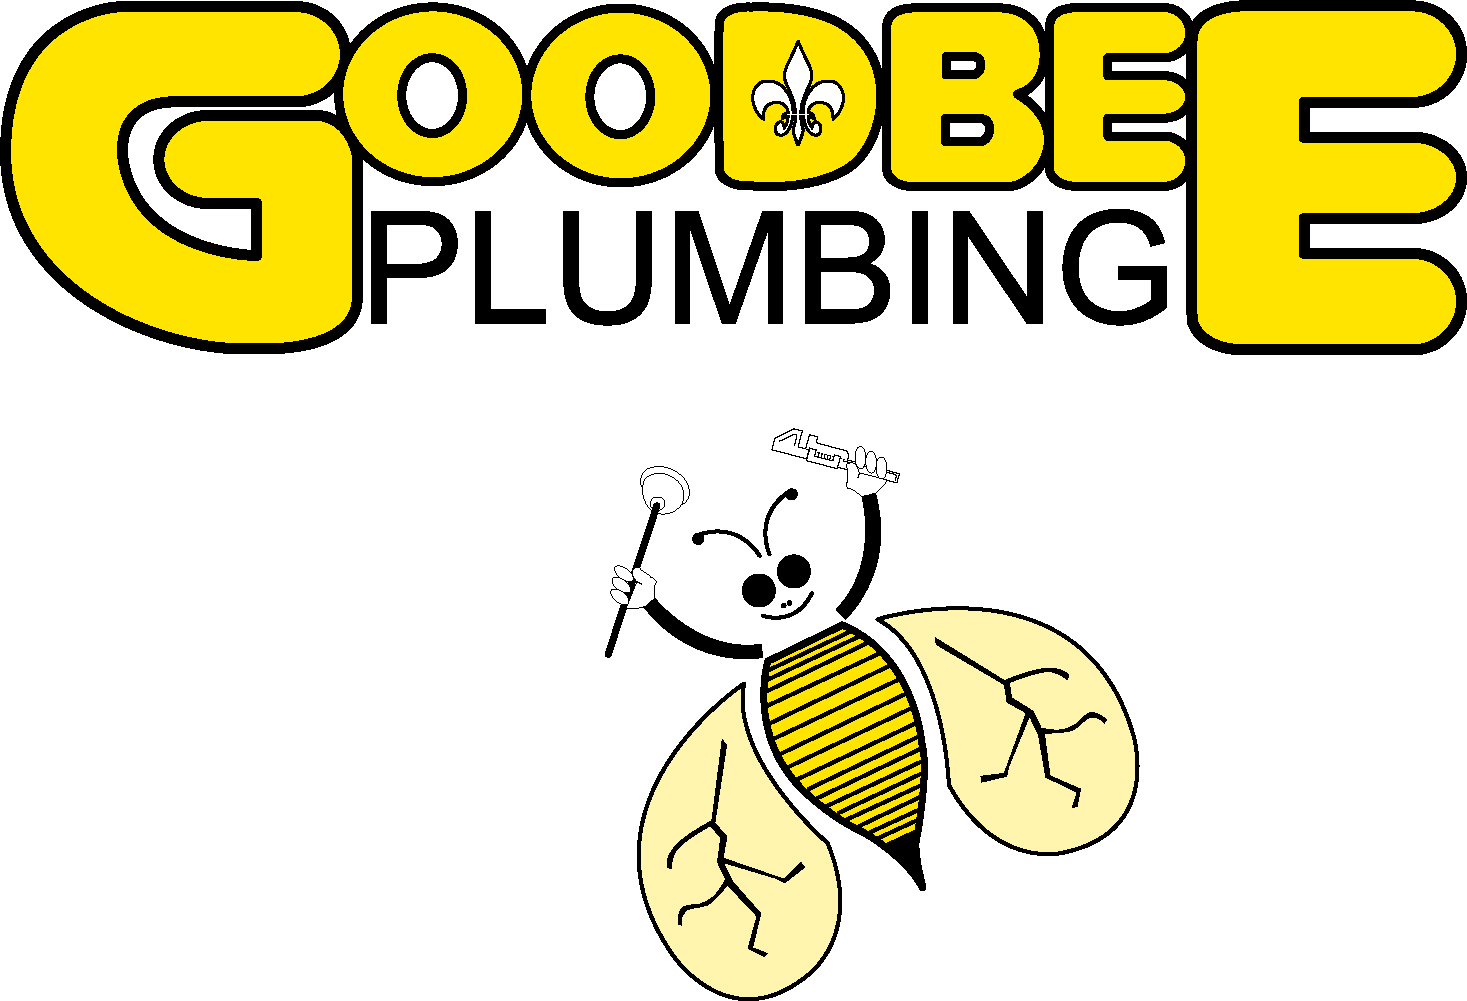 Goodbee Plumbing:  Residential & Commercial